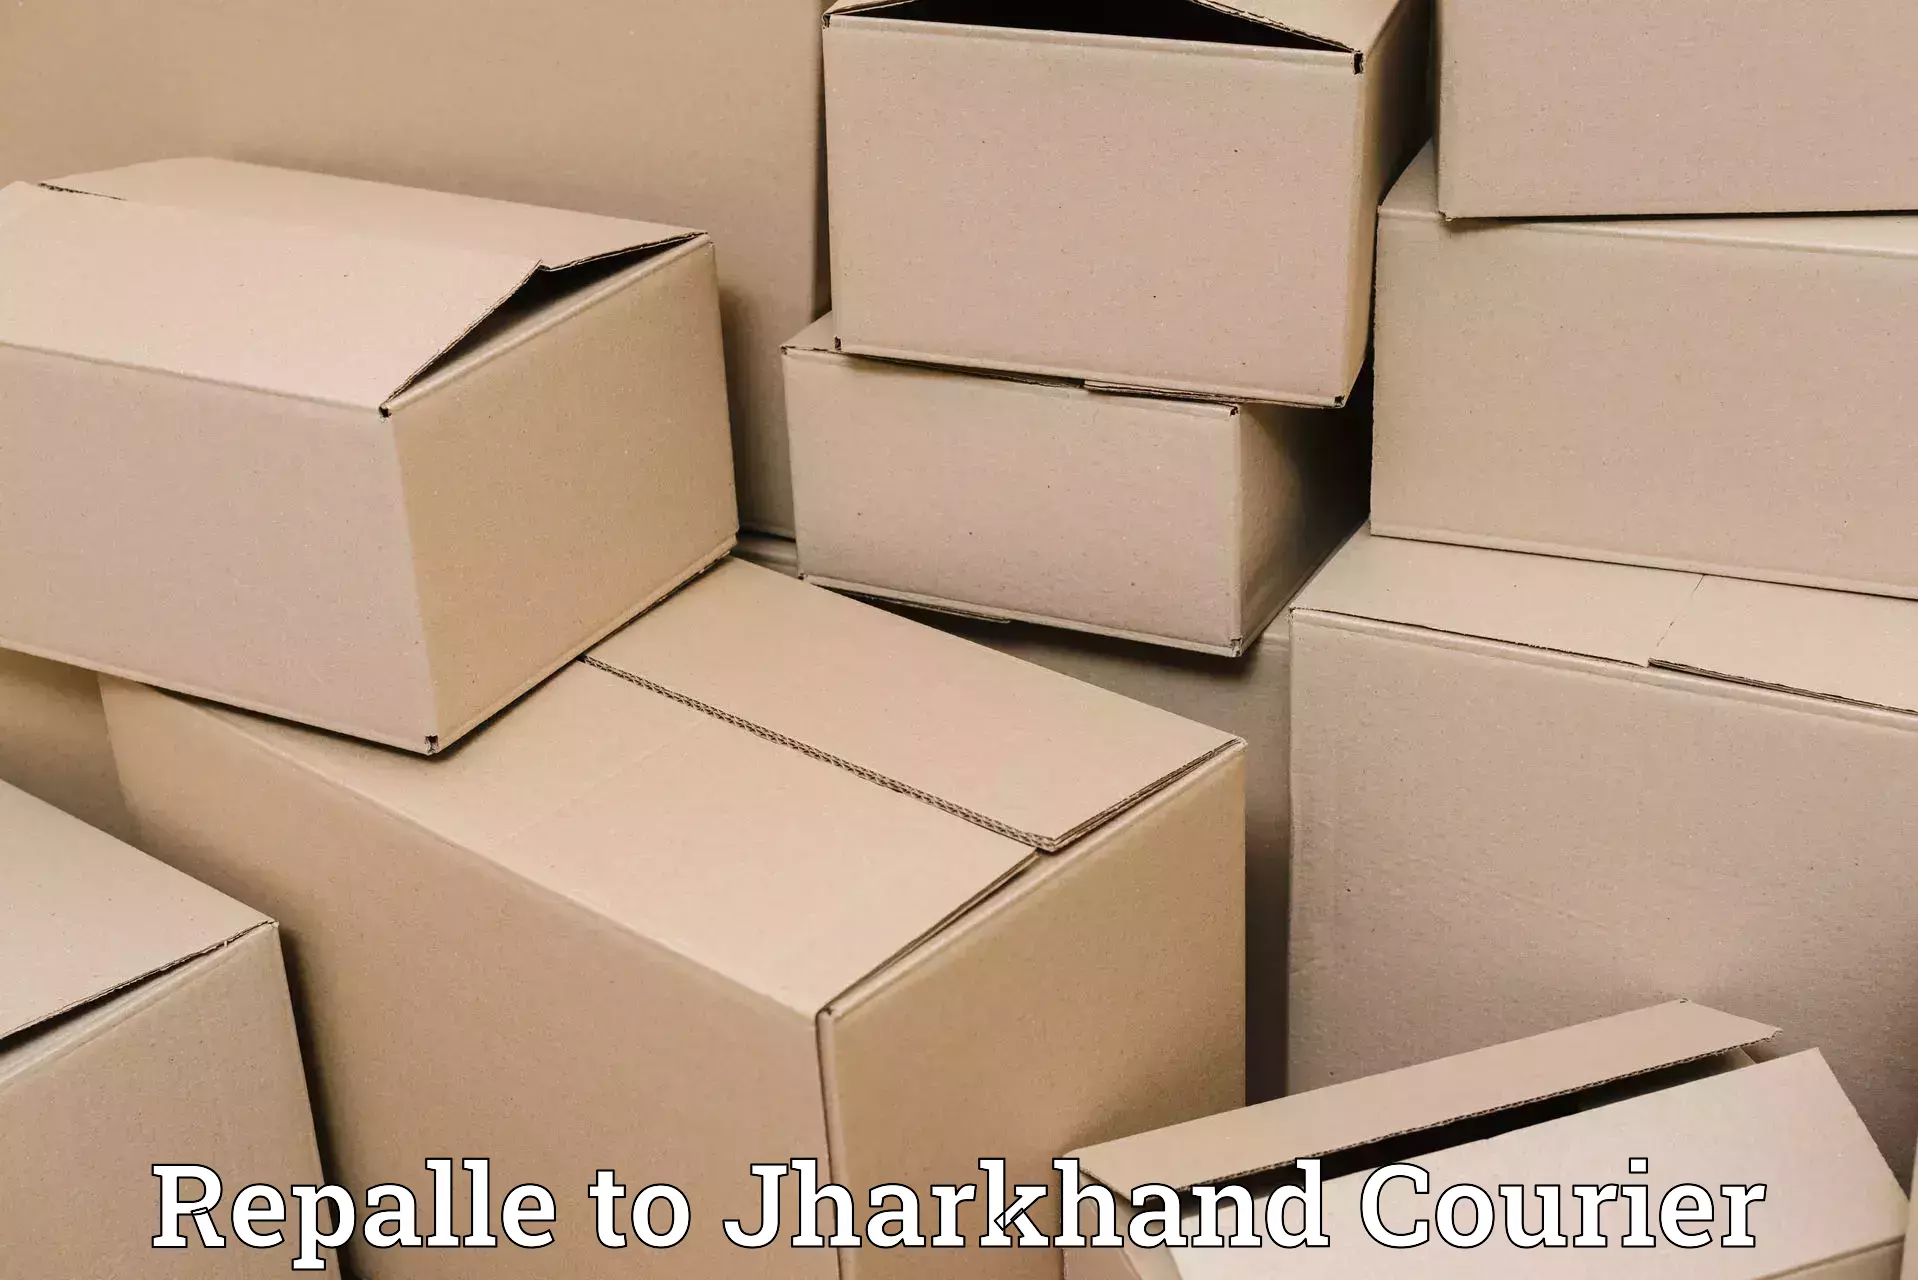 Baggage transport network Repalle to Jharkhand